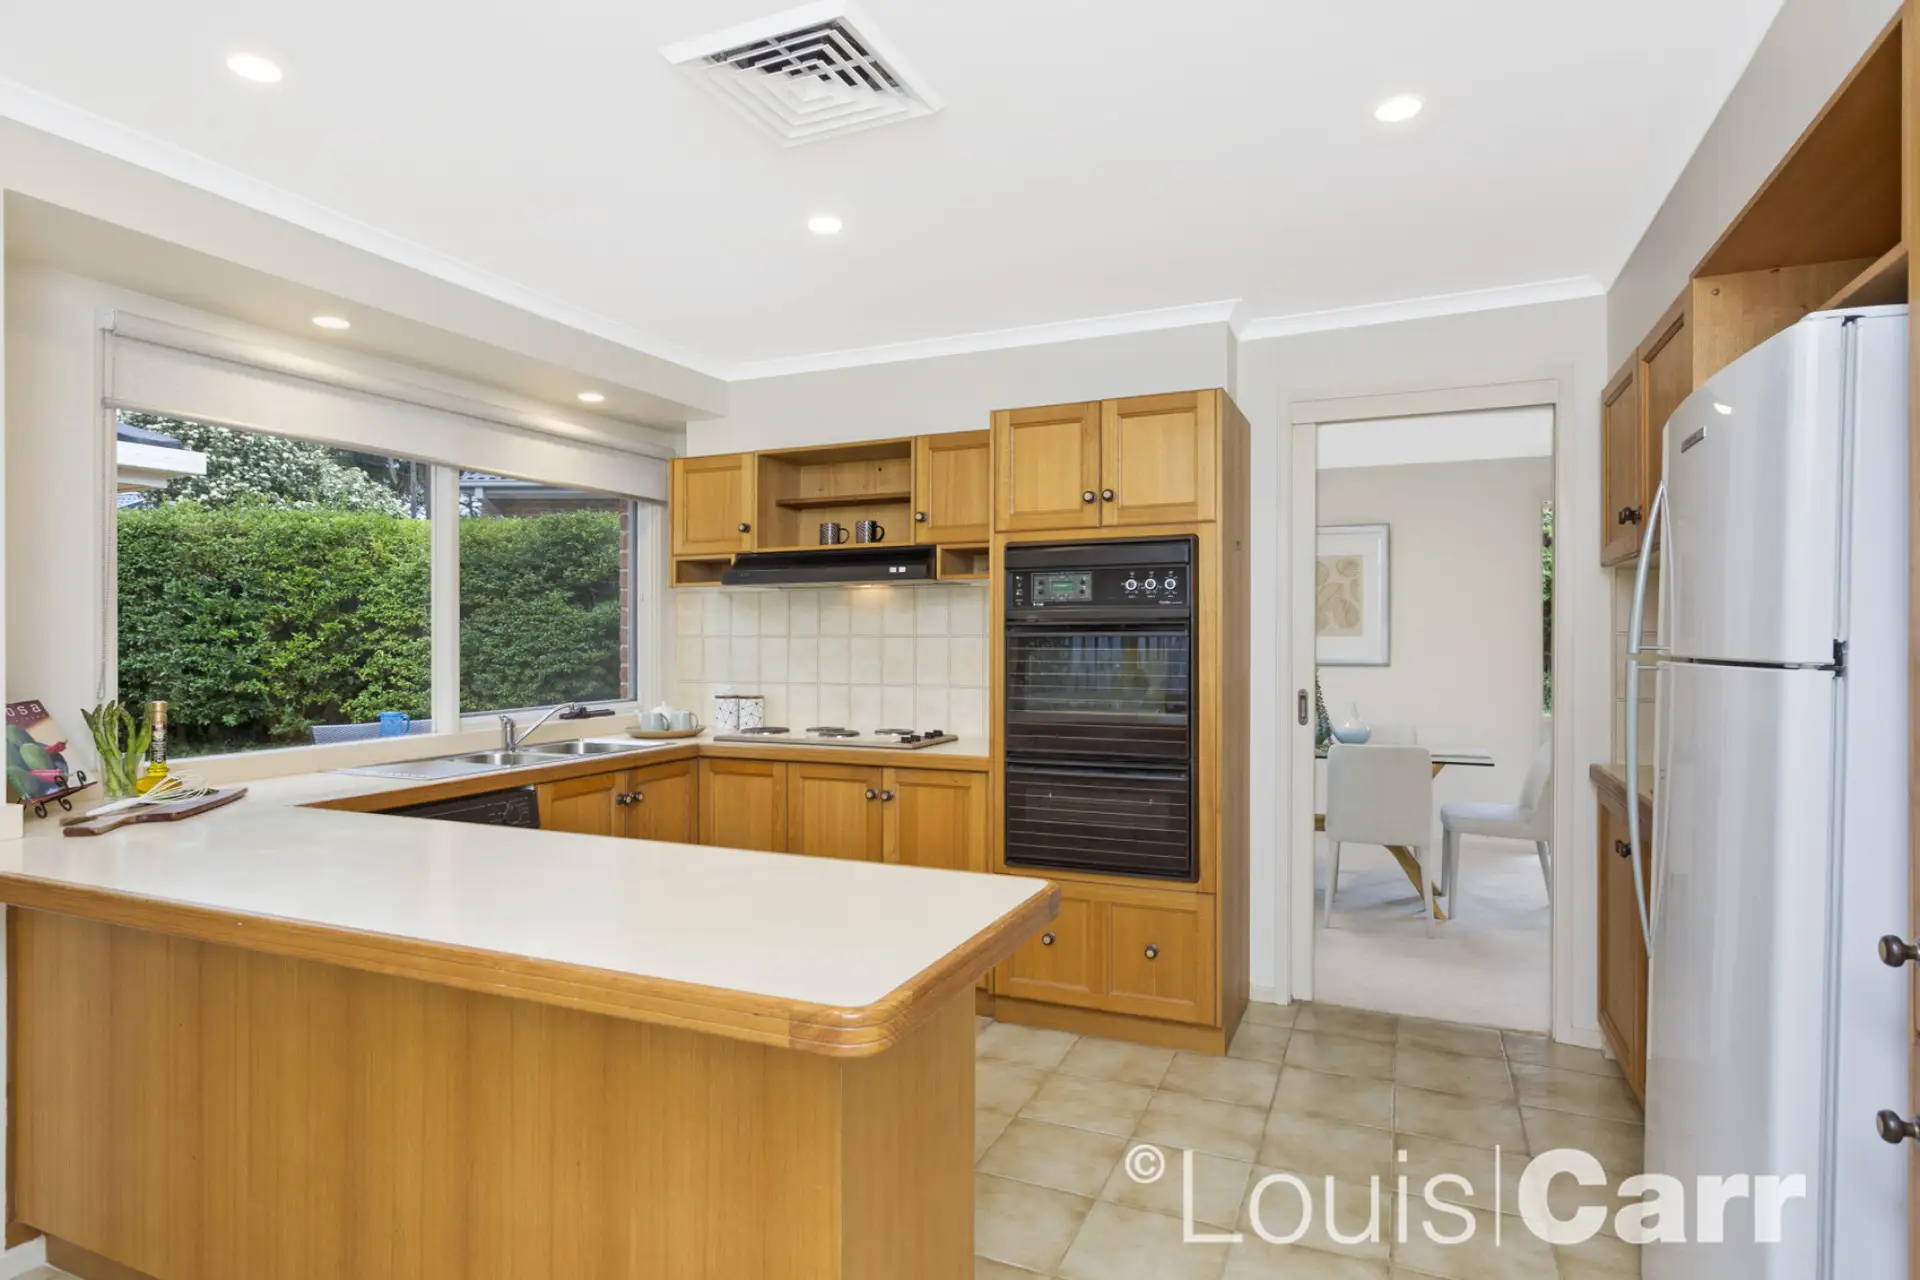 Photo #4: 9 Pogson Drive, Cherrybrook - Sold by Louis Carr Real Estate